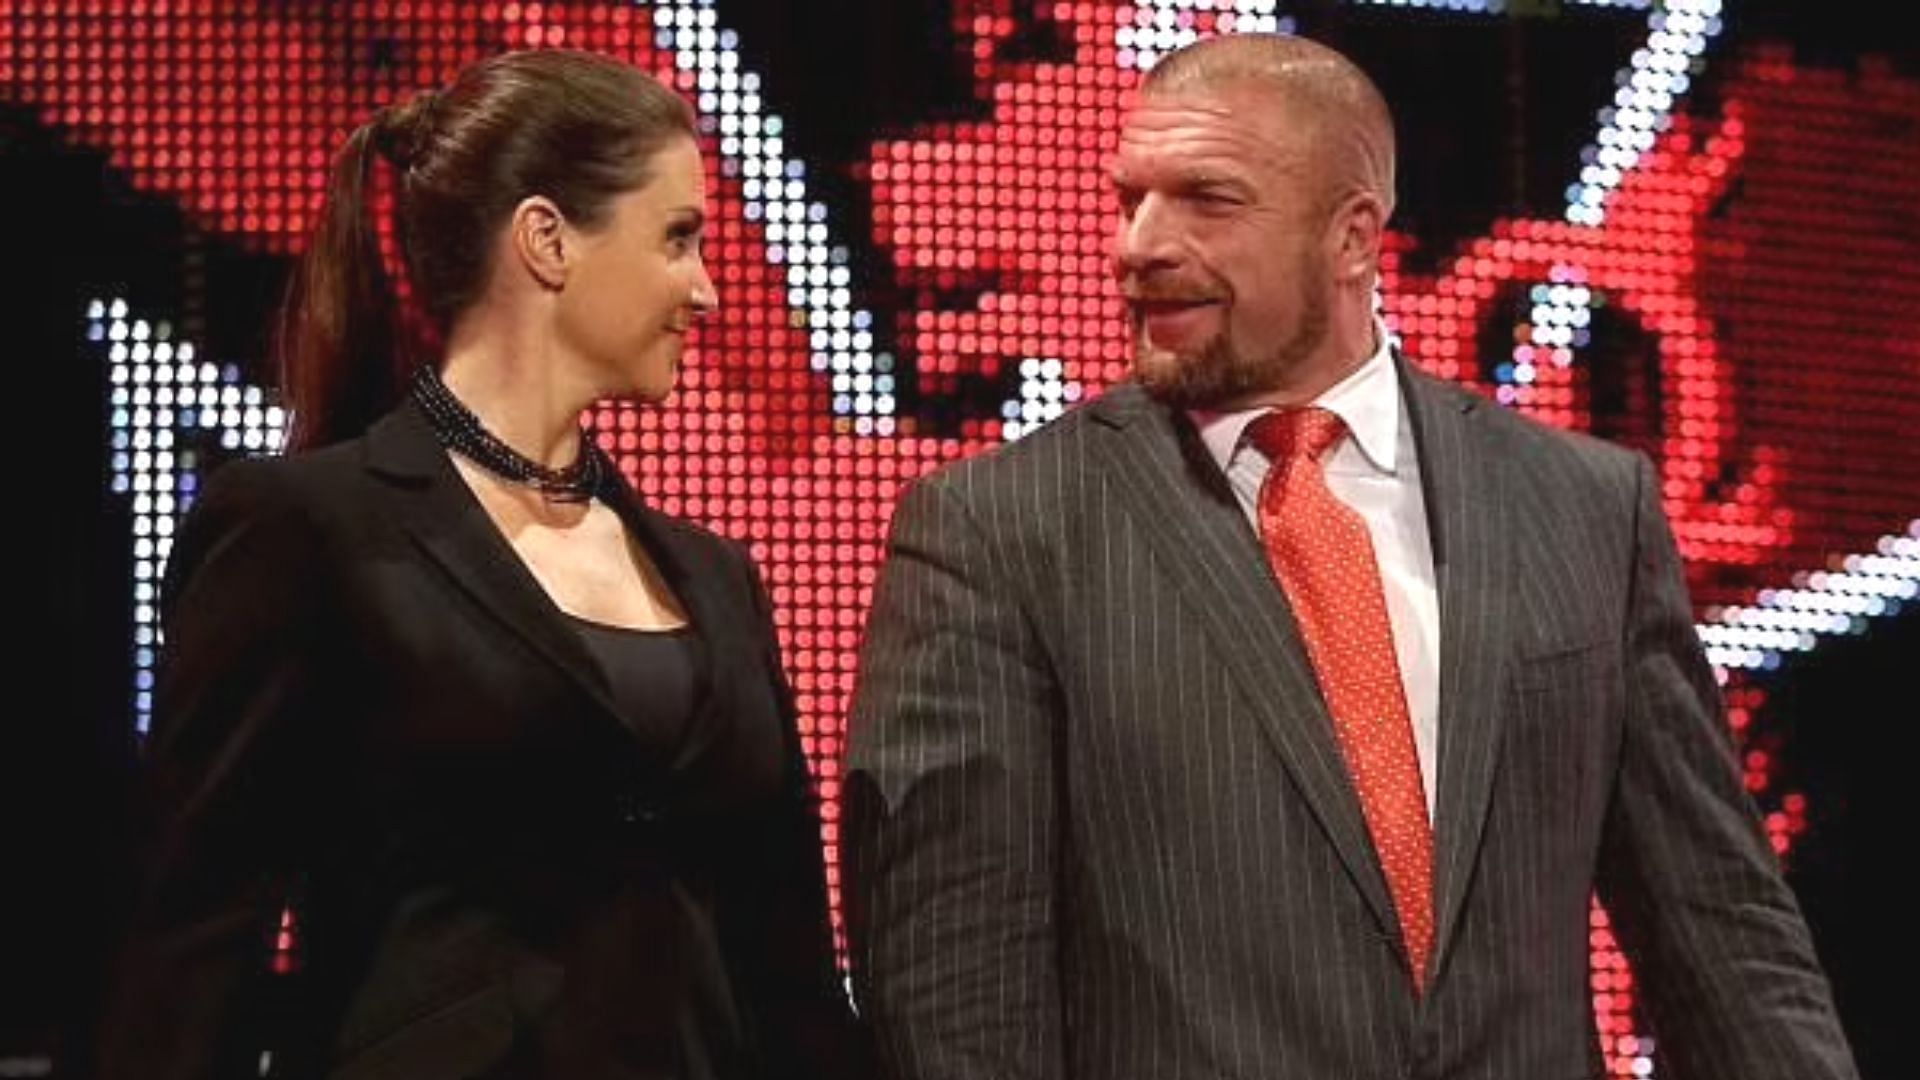 Stephanie McMahon and Triple H are leading WWE after Vince McMahon&#039;s departure.